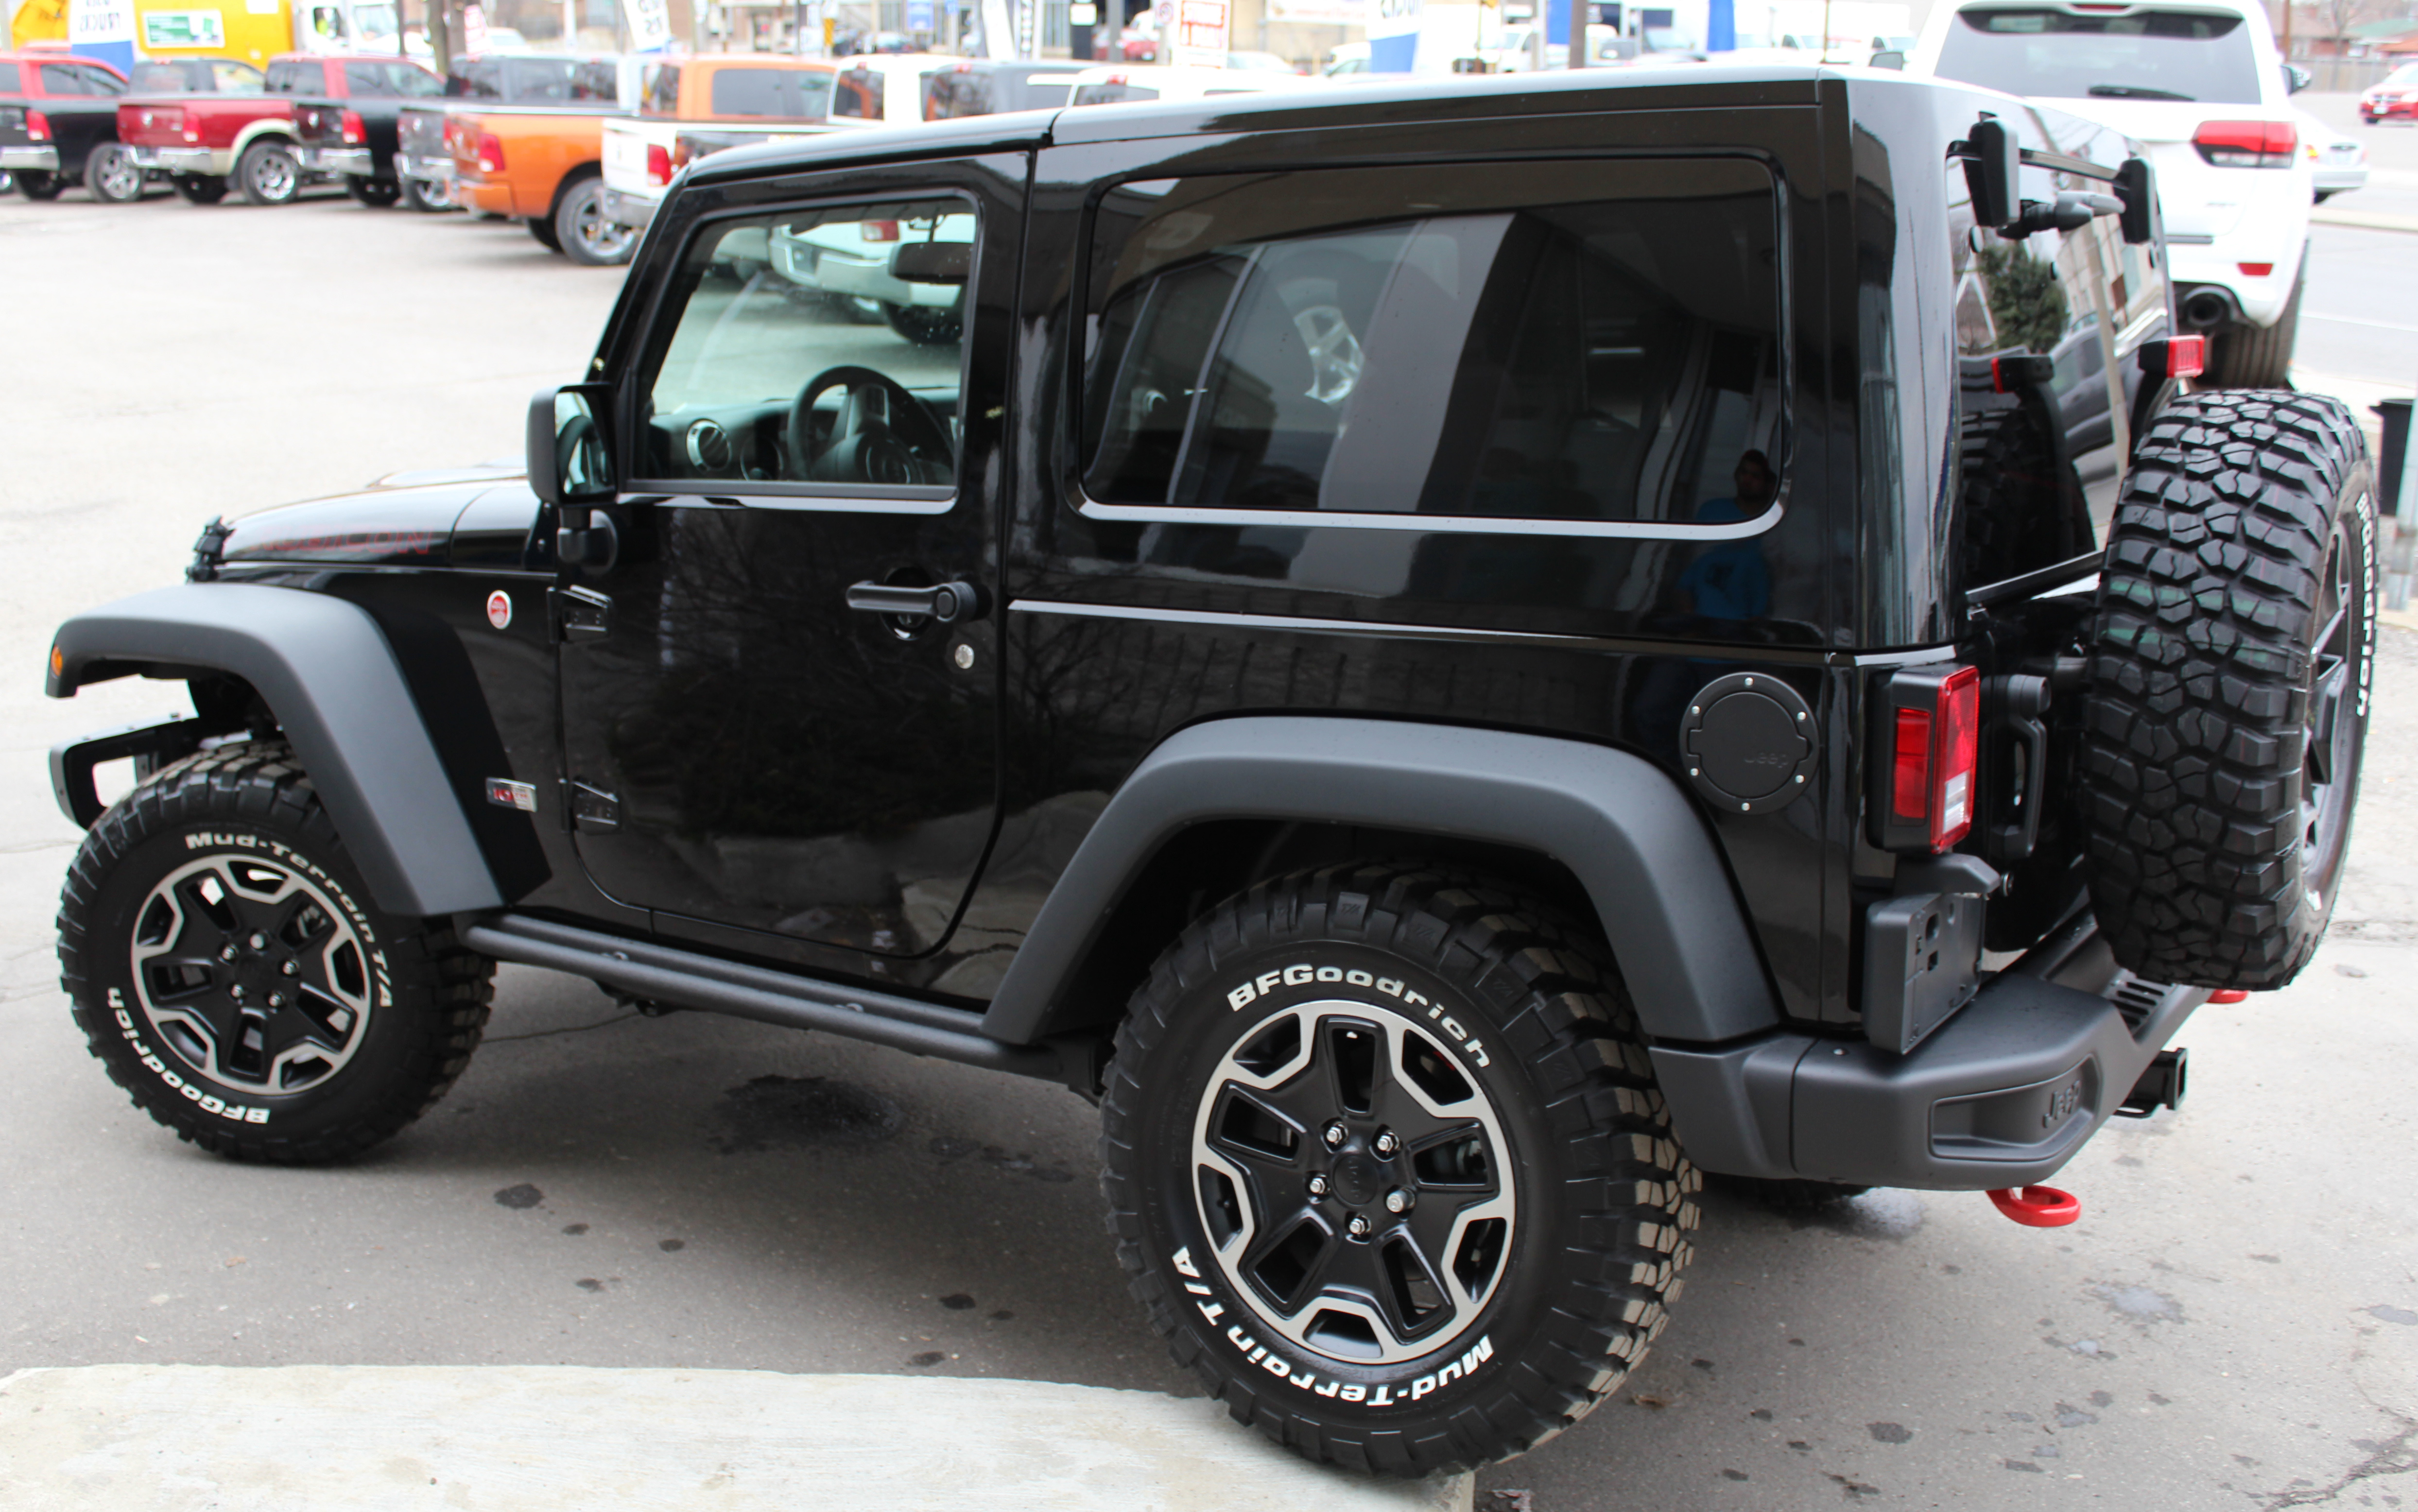 2013 Jeep rubicon pictures #2